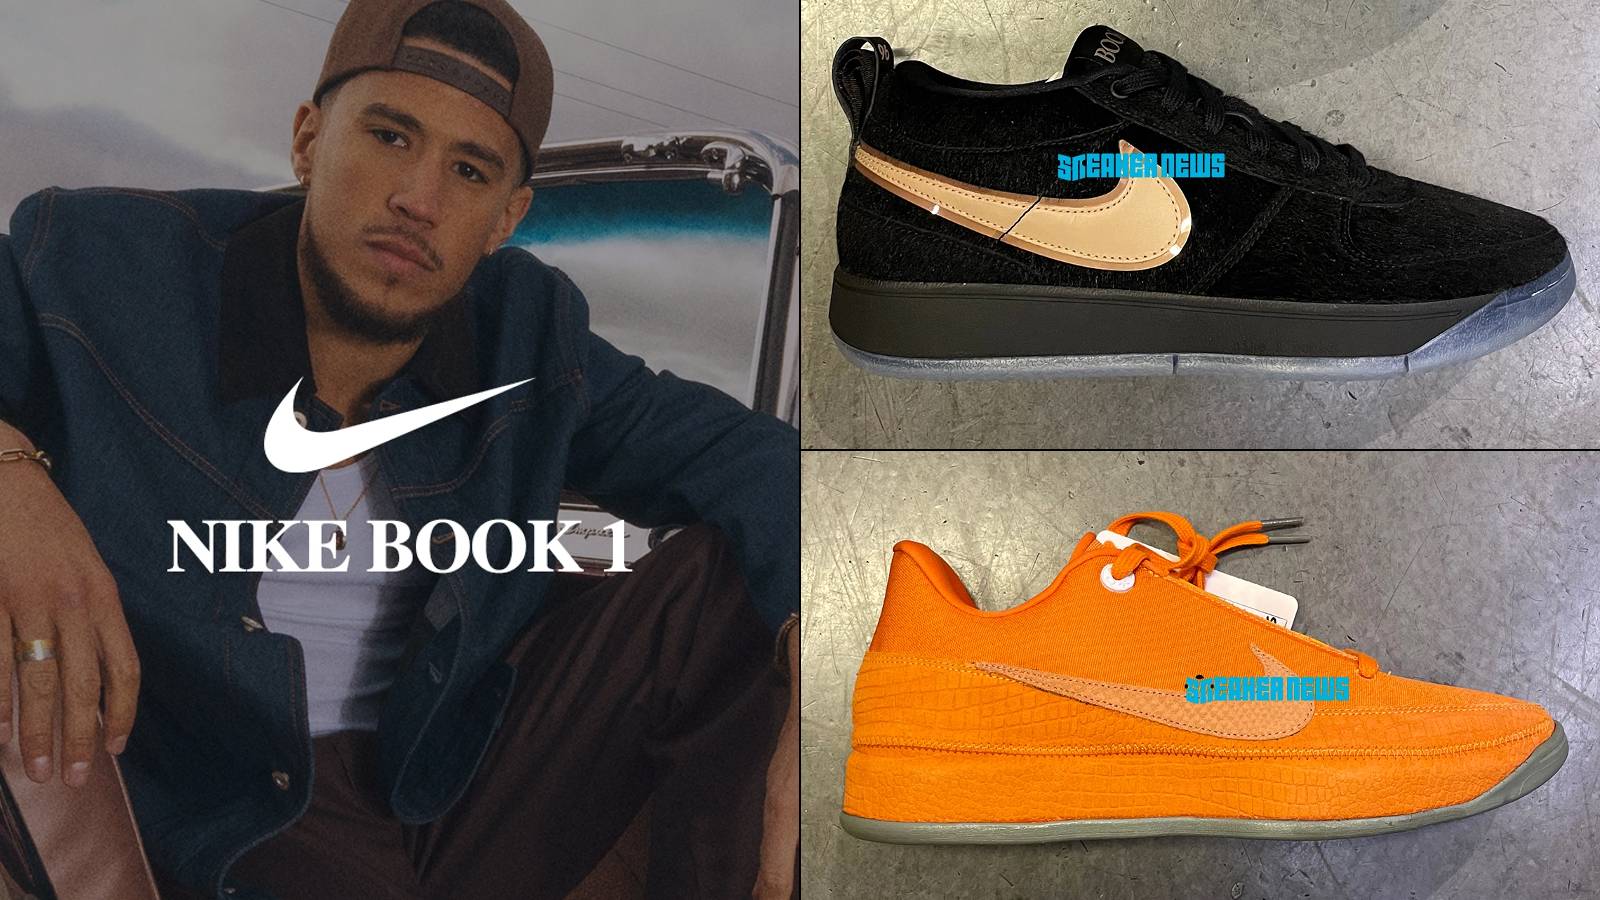 Devin Booker: Devin Booker x Nike Book 1 “Chapter One” shoes